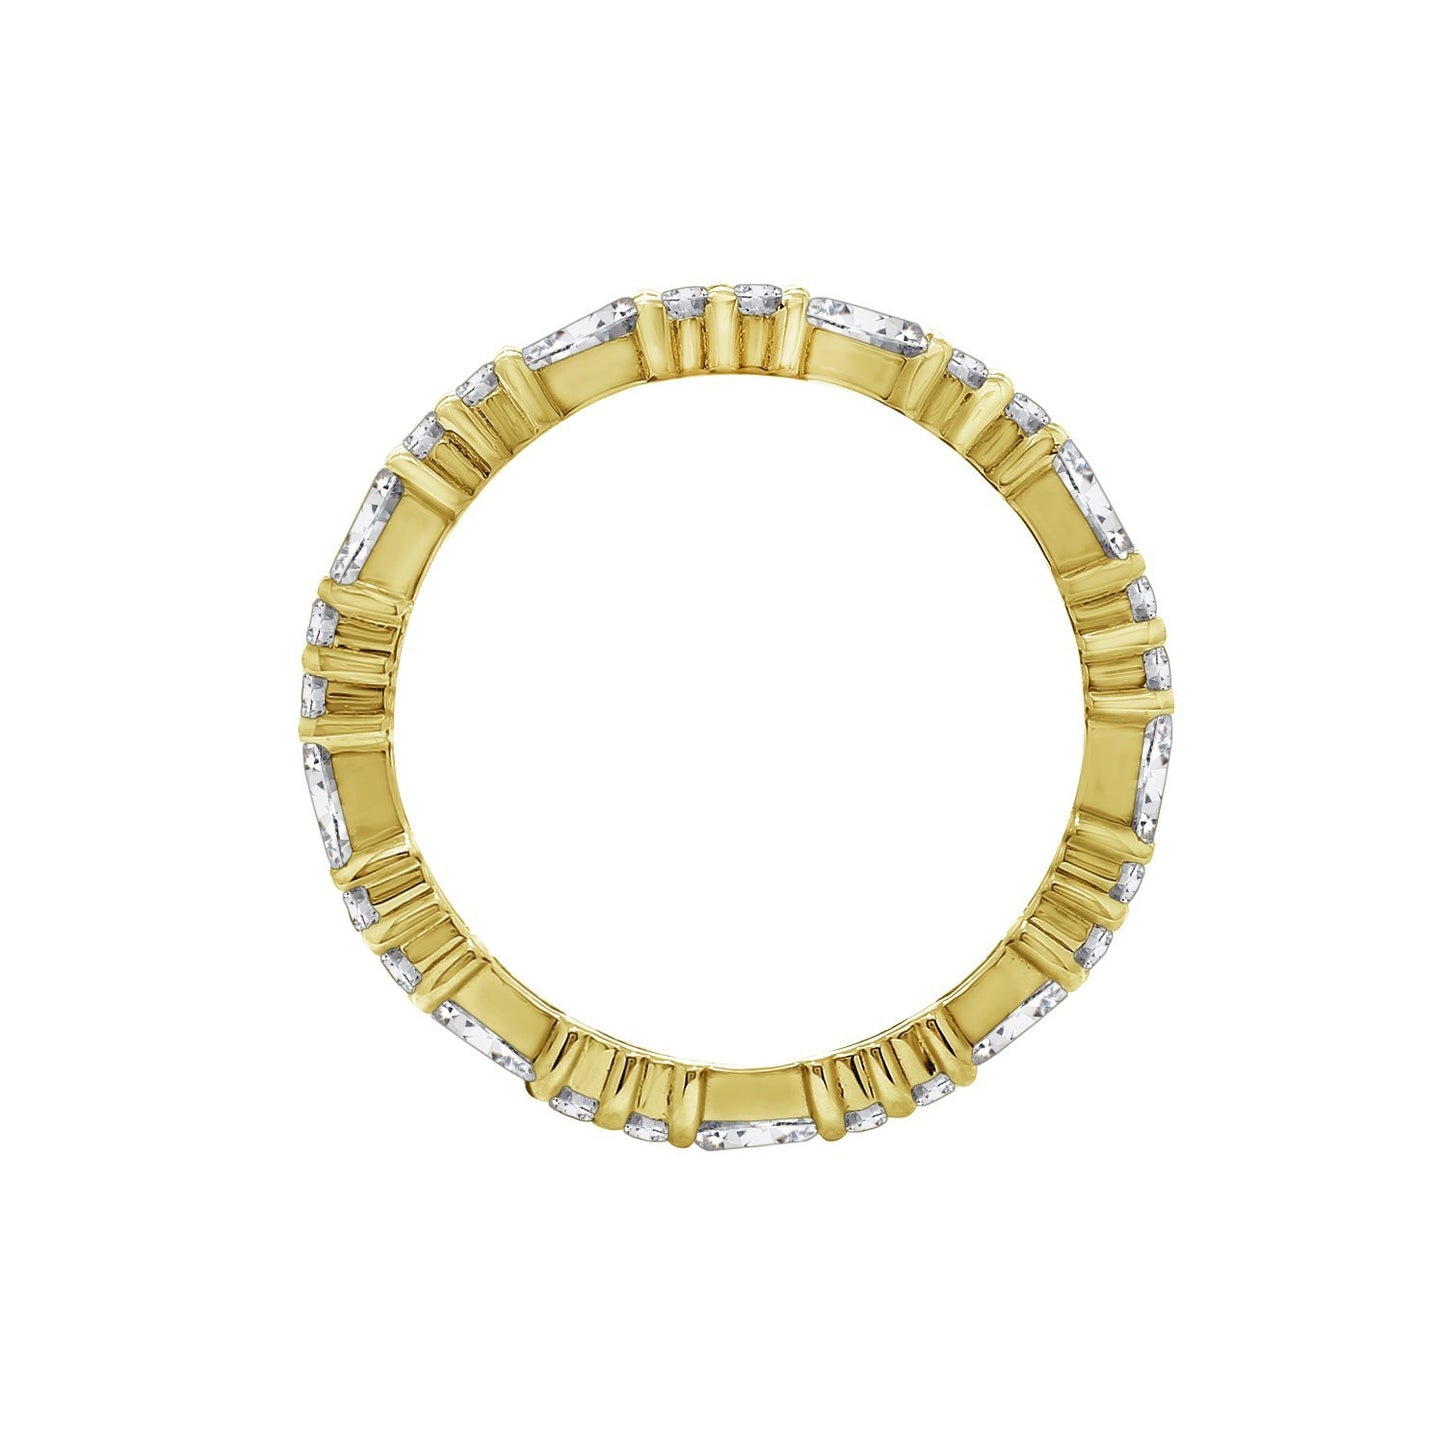 KIERA COUTURE RING BAR White Baguette Cut Yellow Gold Plated Sterling Silver Eternity Band Ring